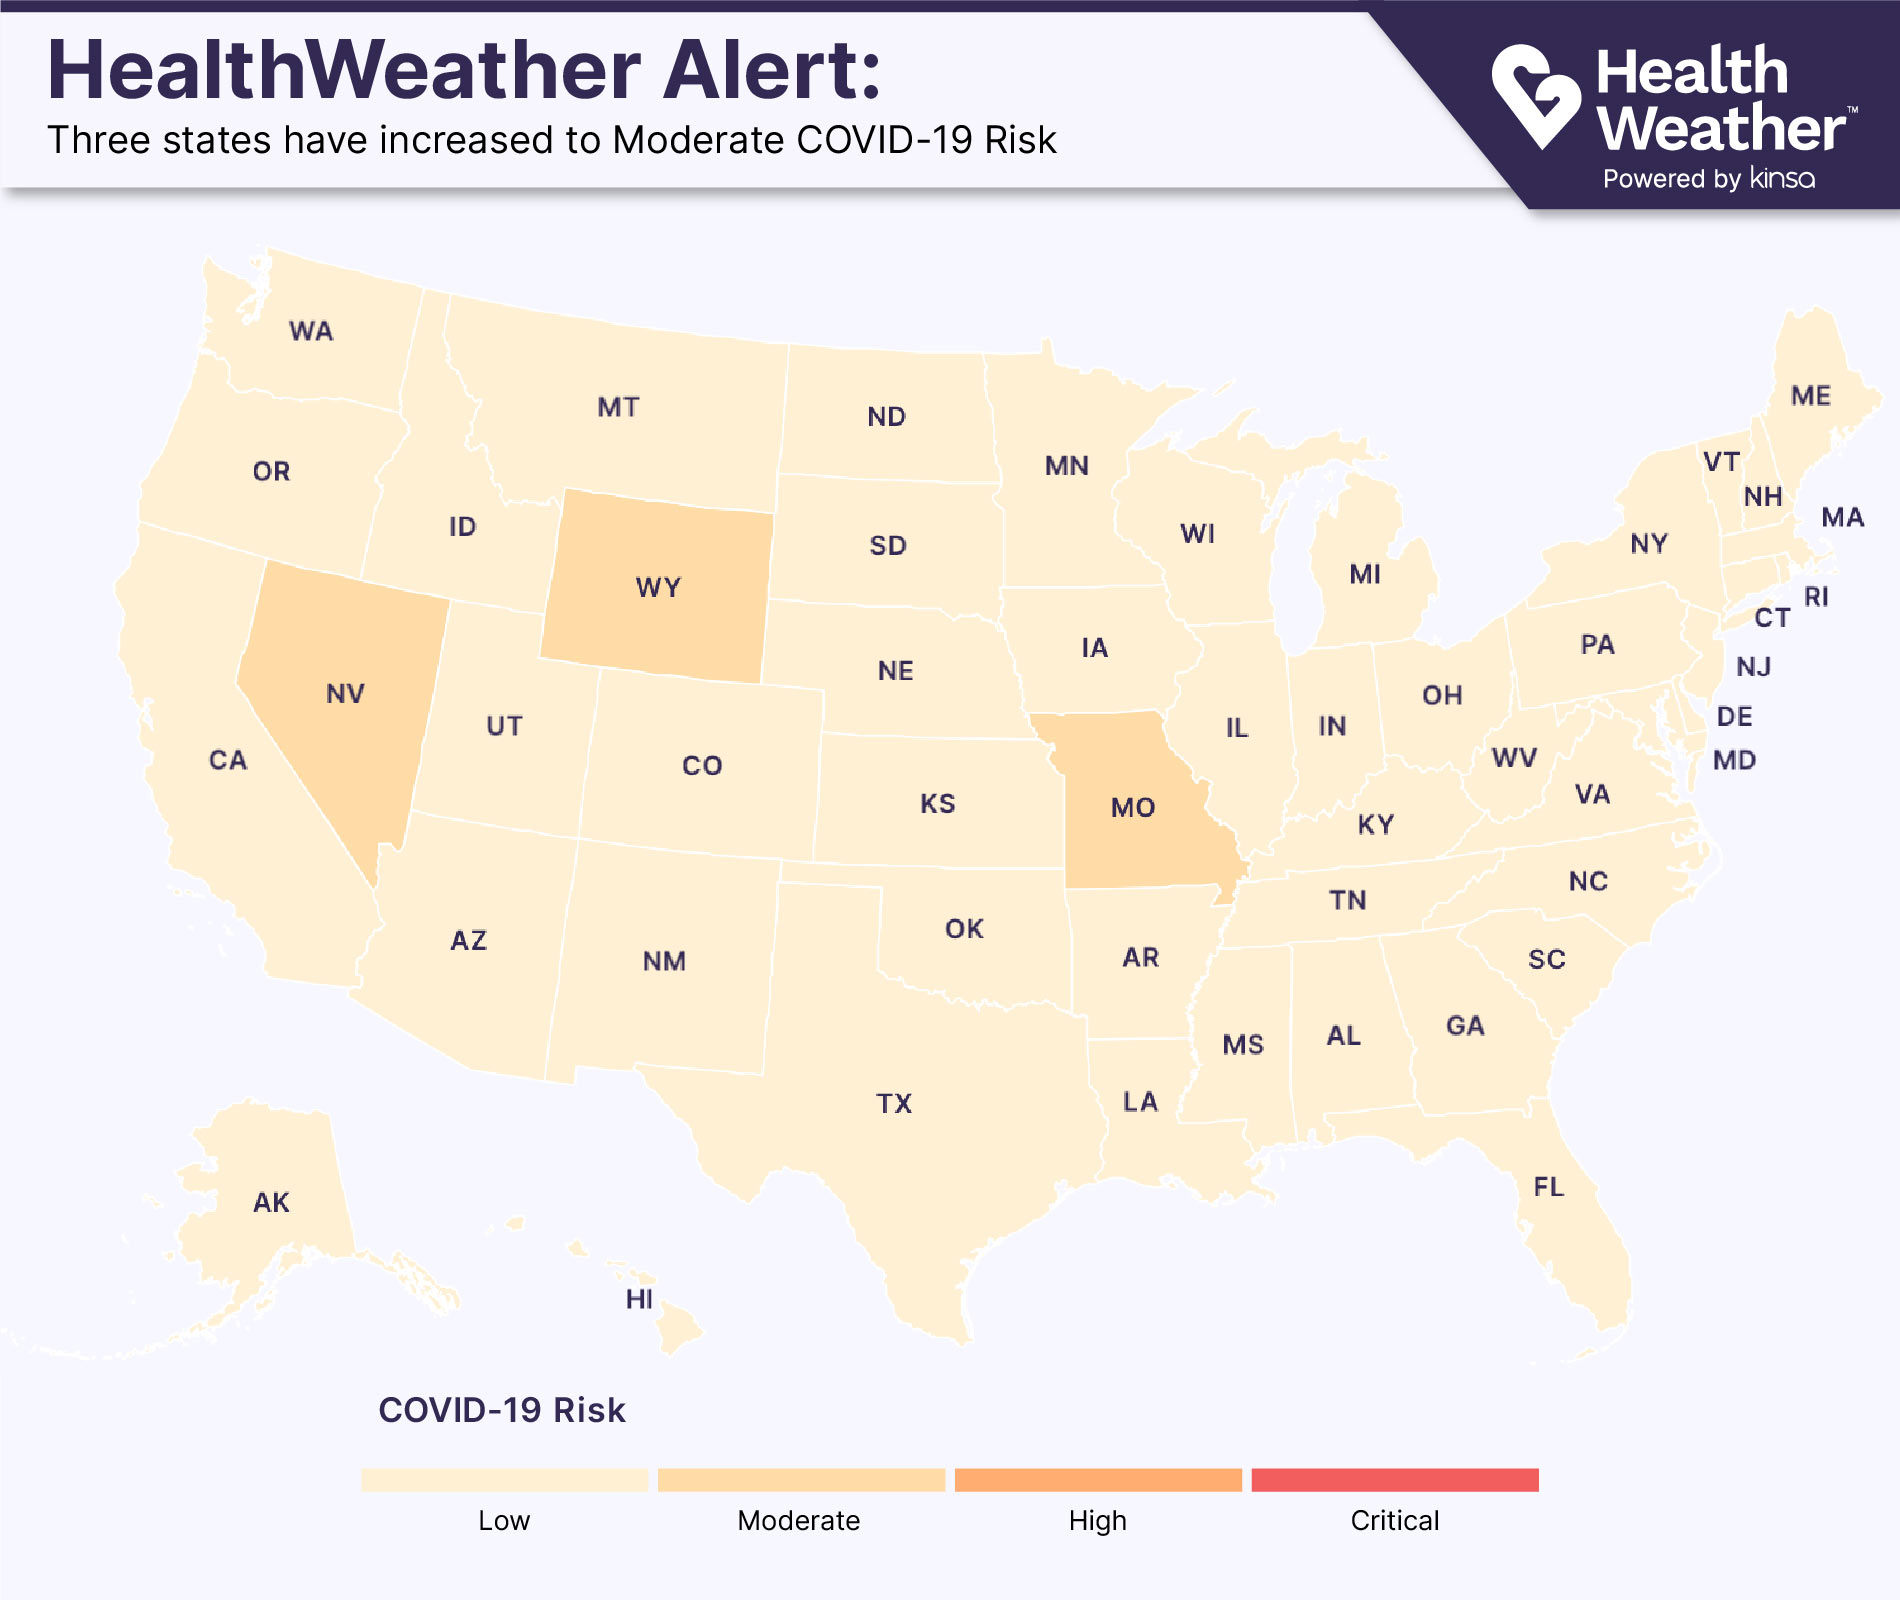 Map showing MO, WY and NV as the only states with elevated COVID-19 risk scores